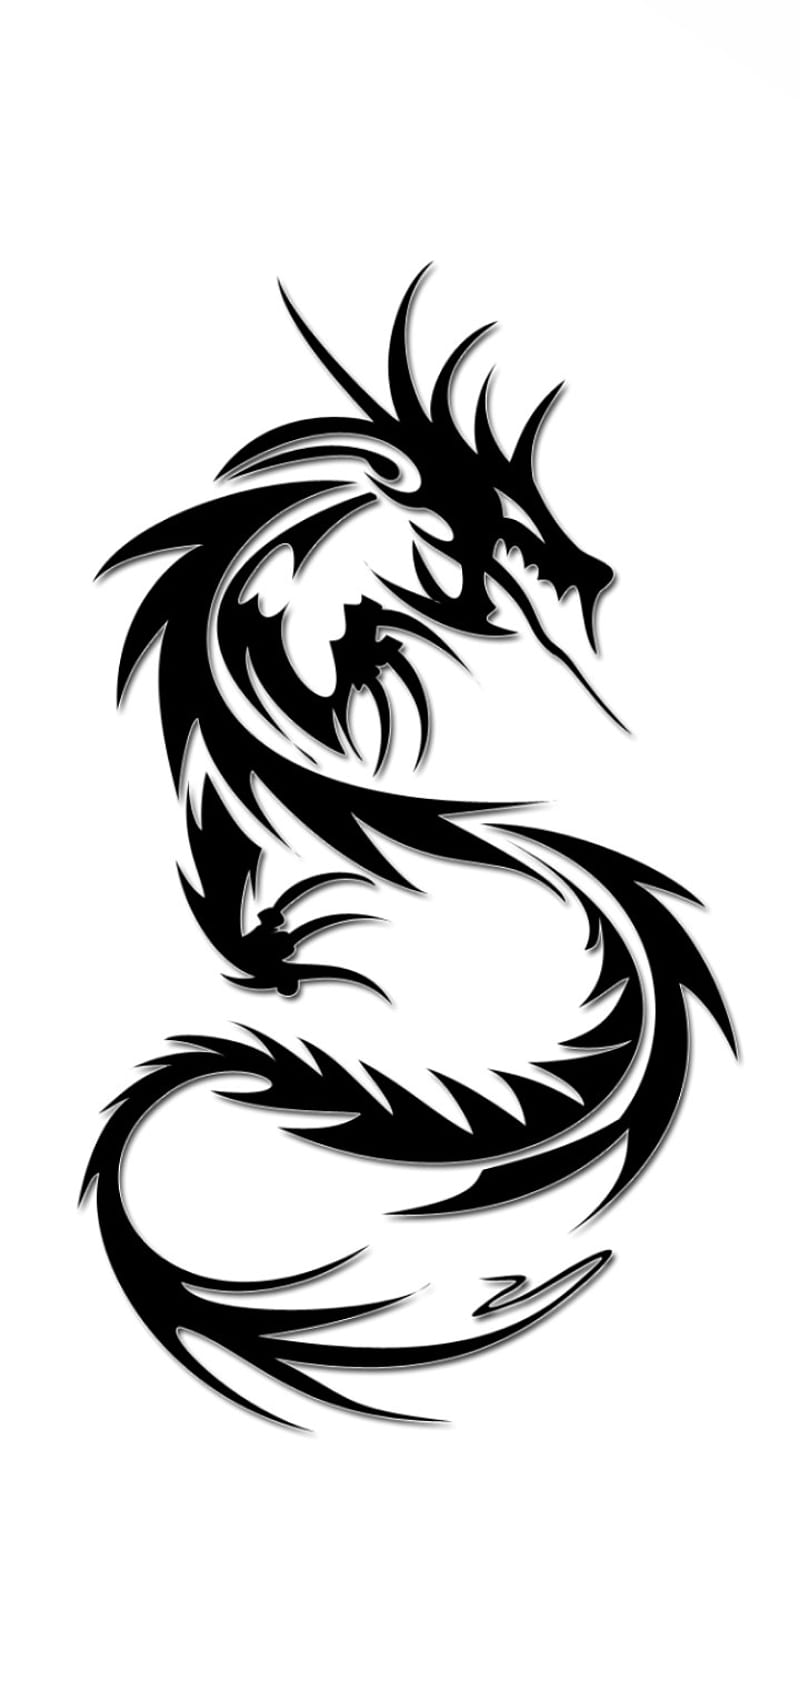 Voorkoms Big Dragon,3D DragonTattoo,and Dragon sword, Tribal Dragon tattoo  Waterproof body Temporary tattoo for all men and women pack of 4 :  Amazon.in: Beauty